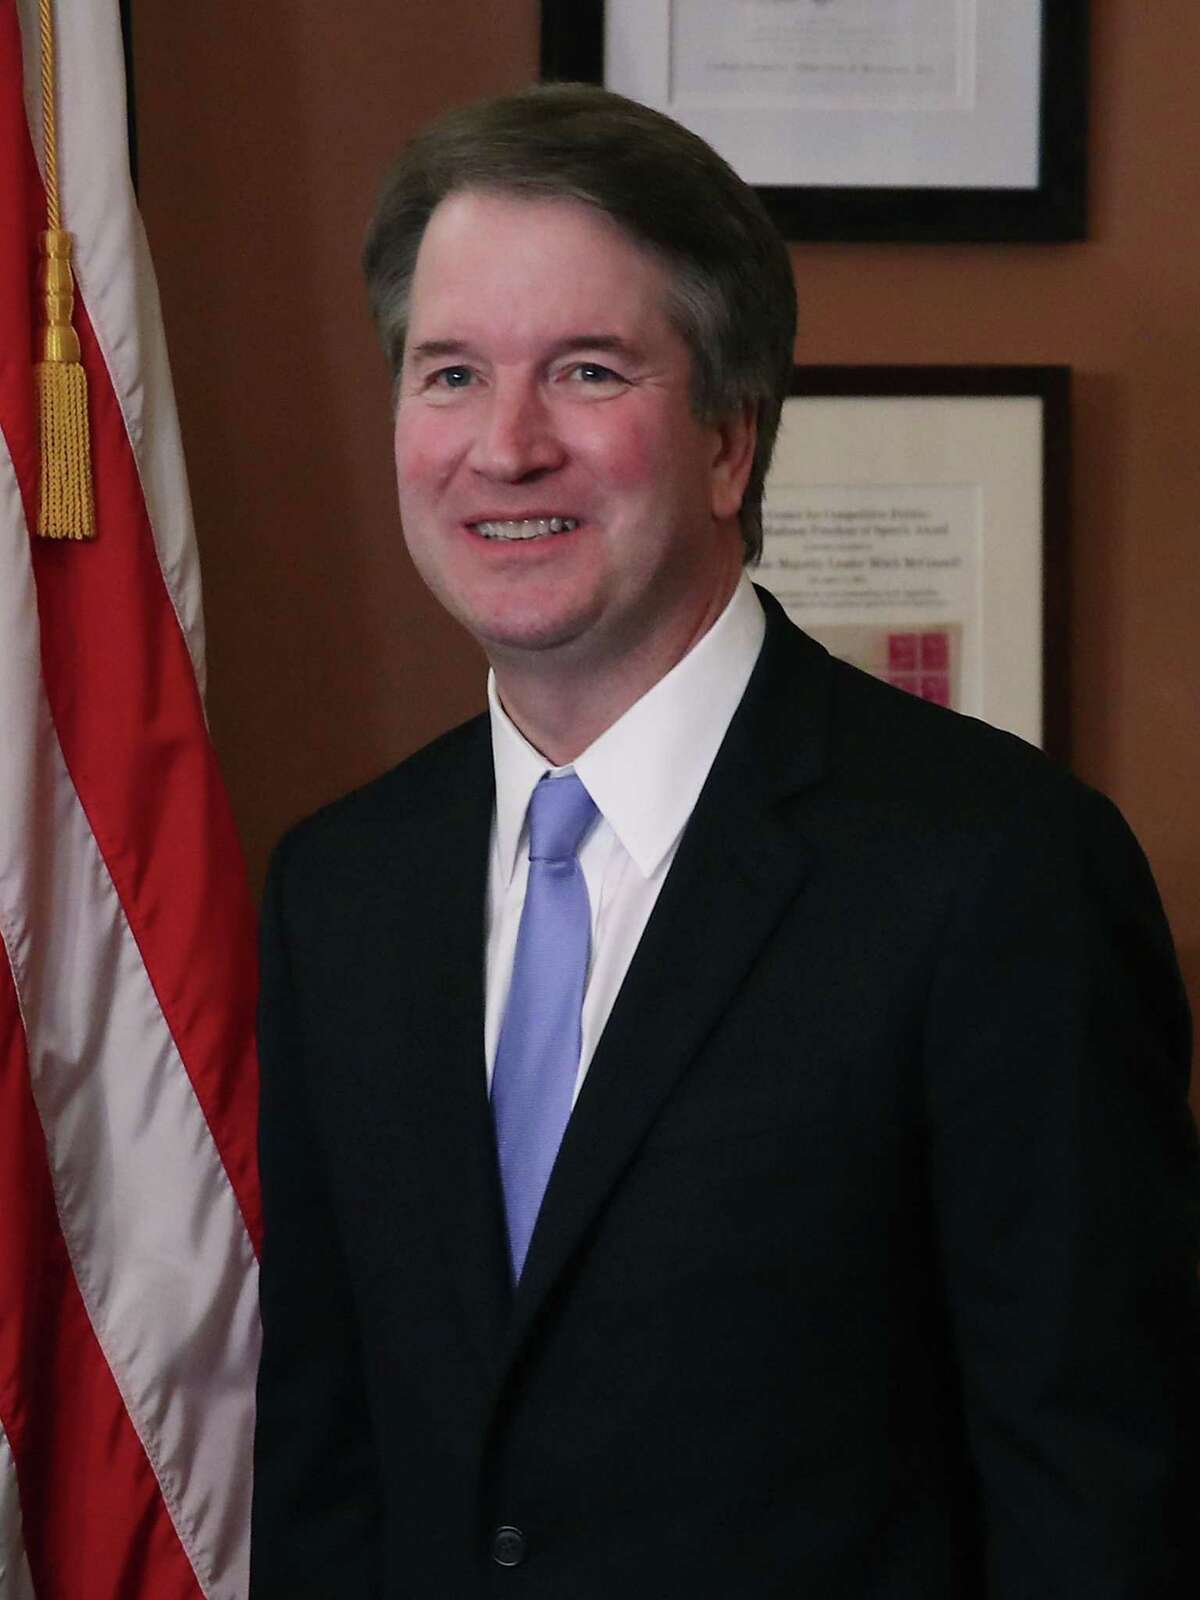 WASHINGTON, DC - AUGUST 01: Supreme Court Justice nominee Judge Brett Kavanaugh, meets with U.S. Sen. Marco Rubio (R-FL) at the U.S. Capitol on August 1, 2018 in Washington, DC. Kavanaugh is meeting with members of the Senate after U.S. President Donald Trump nominated him to succeed retiring Supreme Court Associate Justice Anthony Kennedy. (Photo by Mark Wilson/Getty Images)